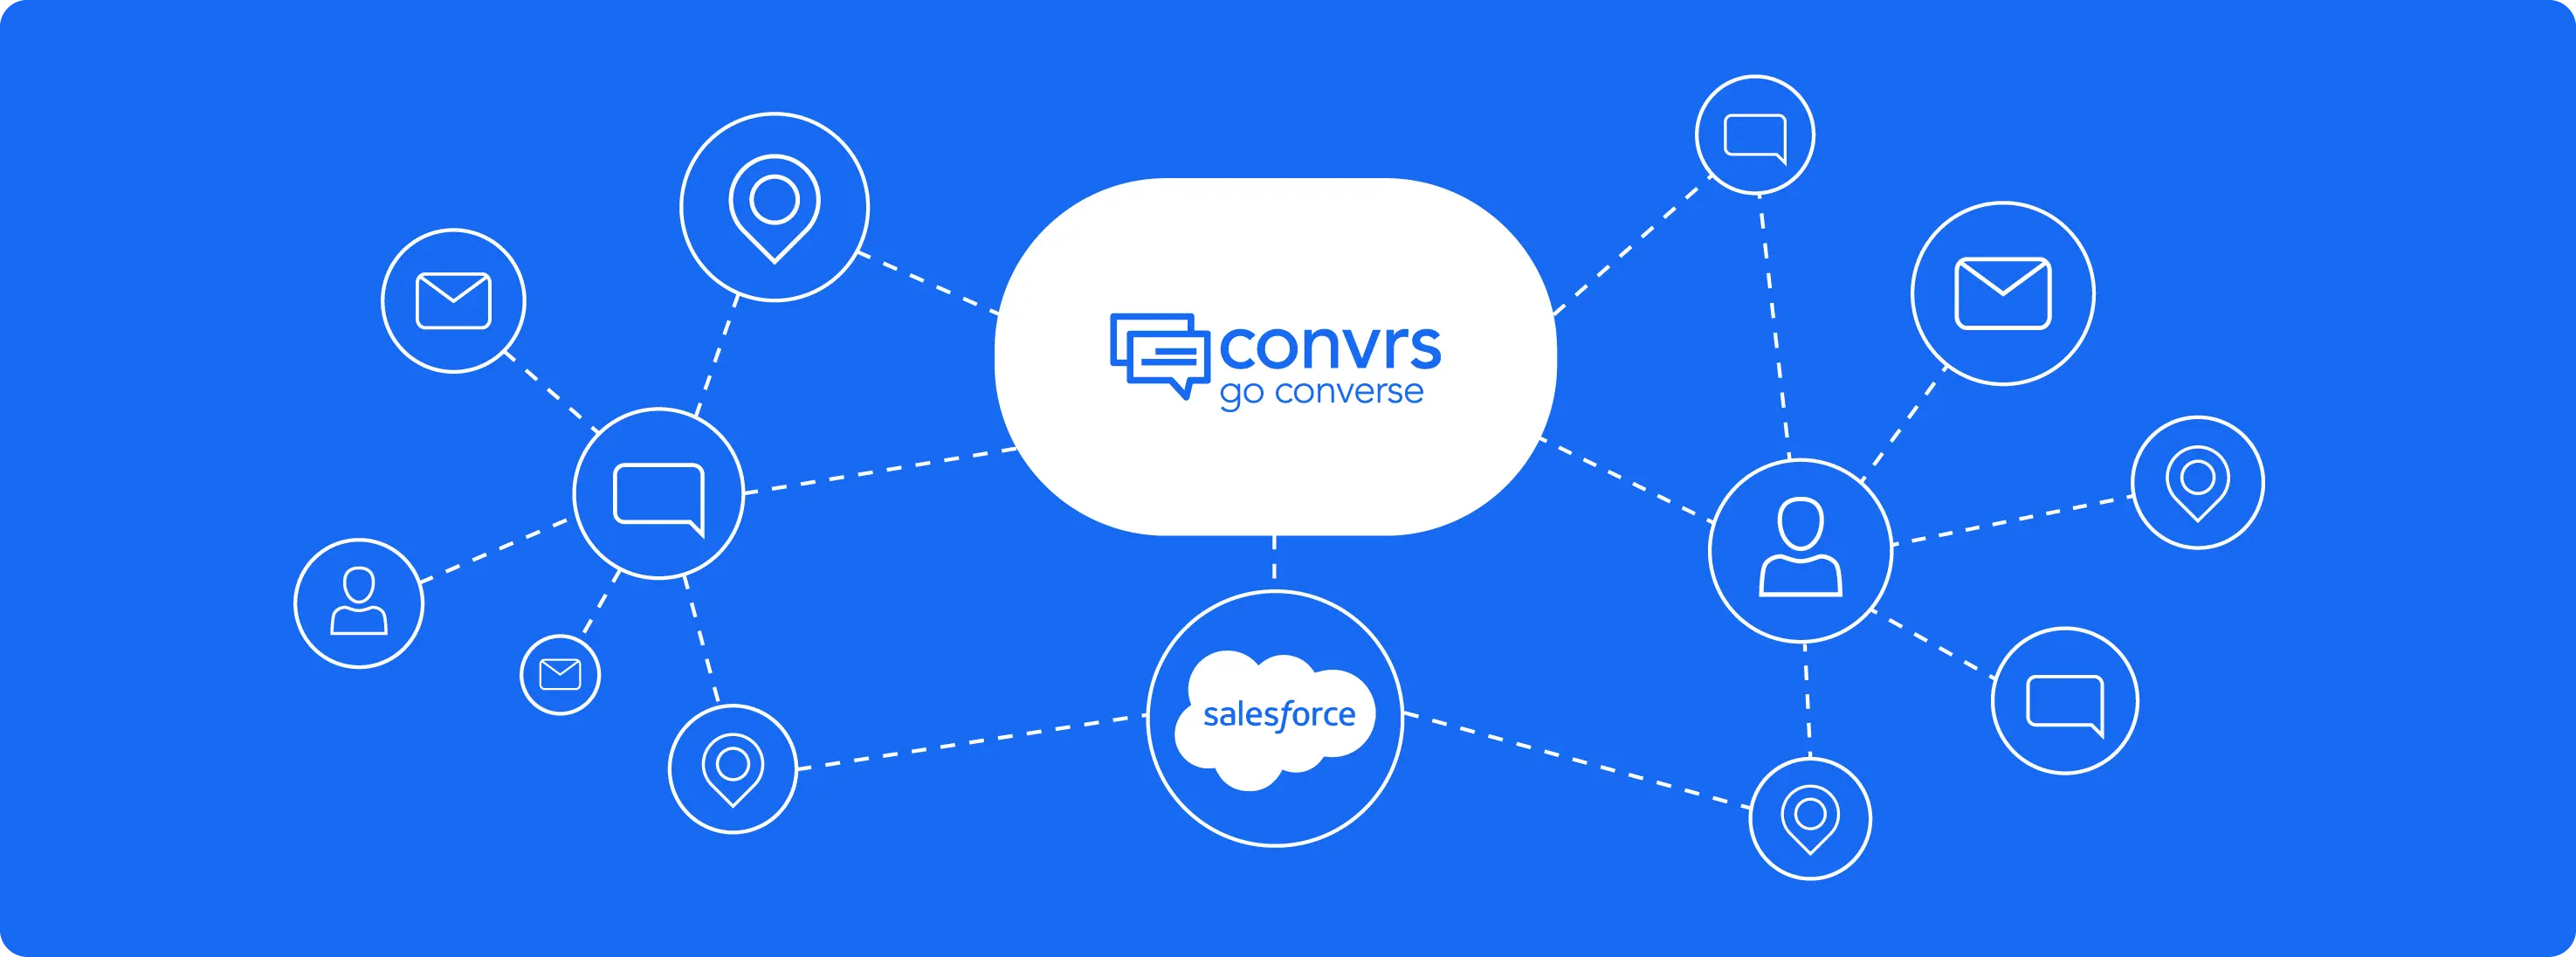 Convrs flow builder connecting to CRM's such as Salesforce